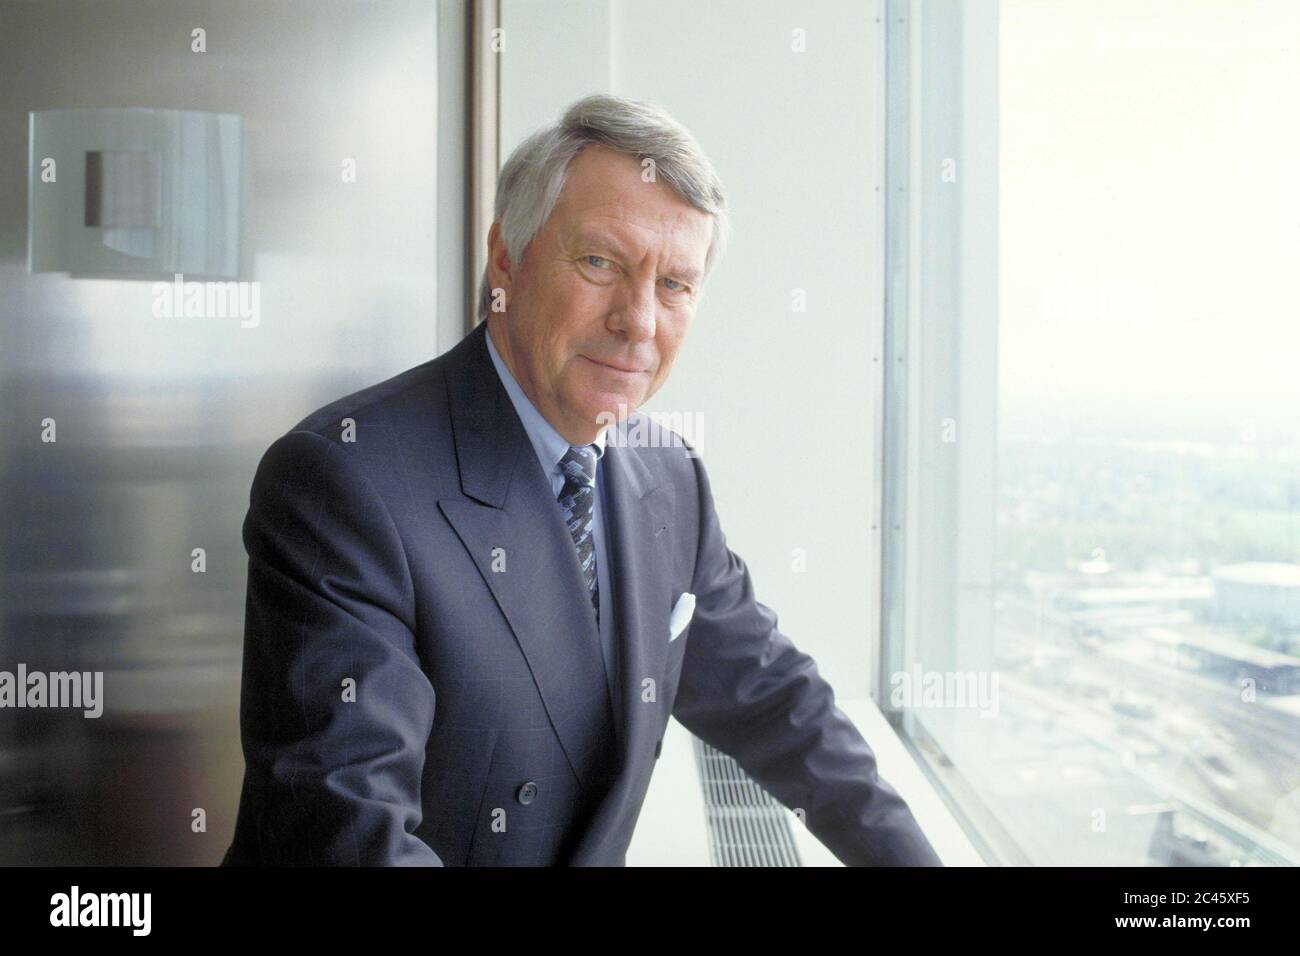 Dr. Manfred Schneider - former CEO and current Chairman of the Supervisory Board of Bayer AG Stock Photo